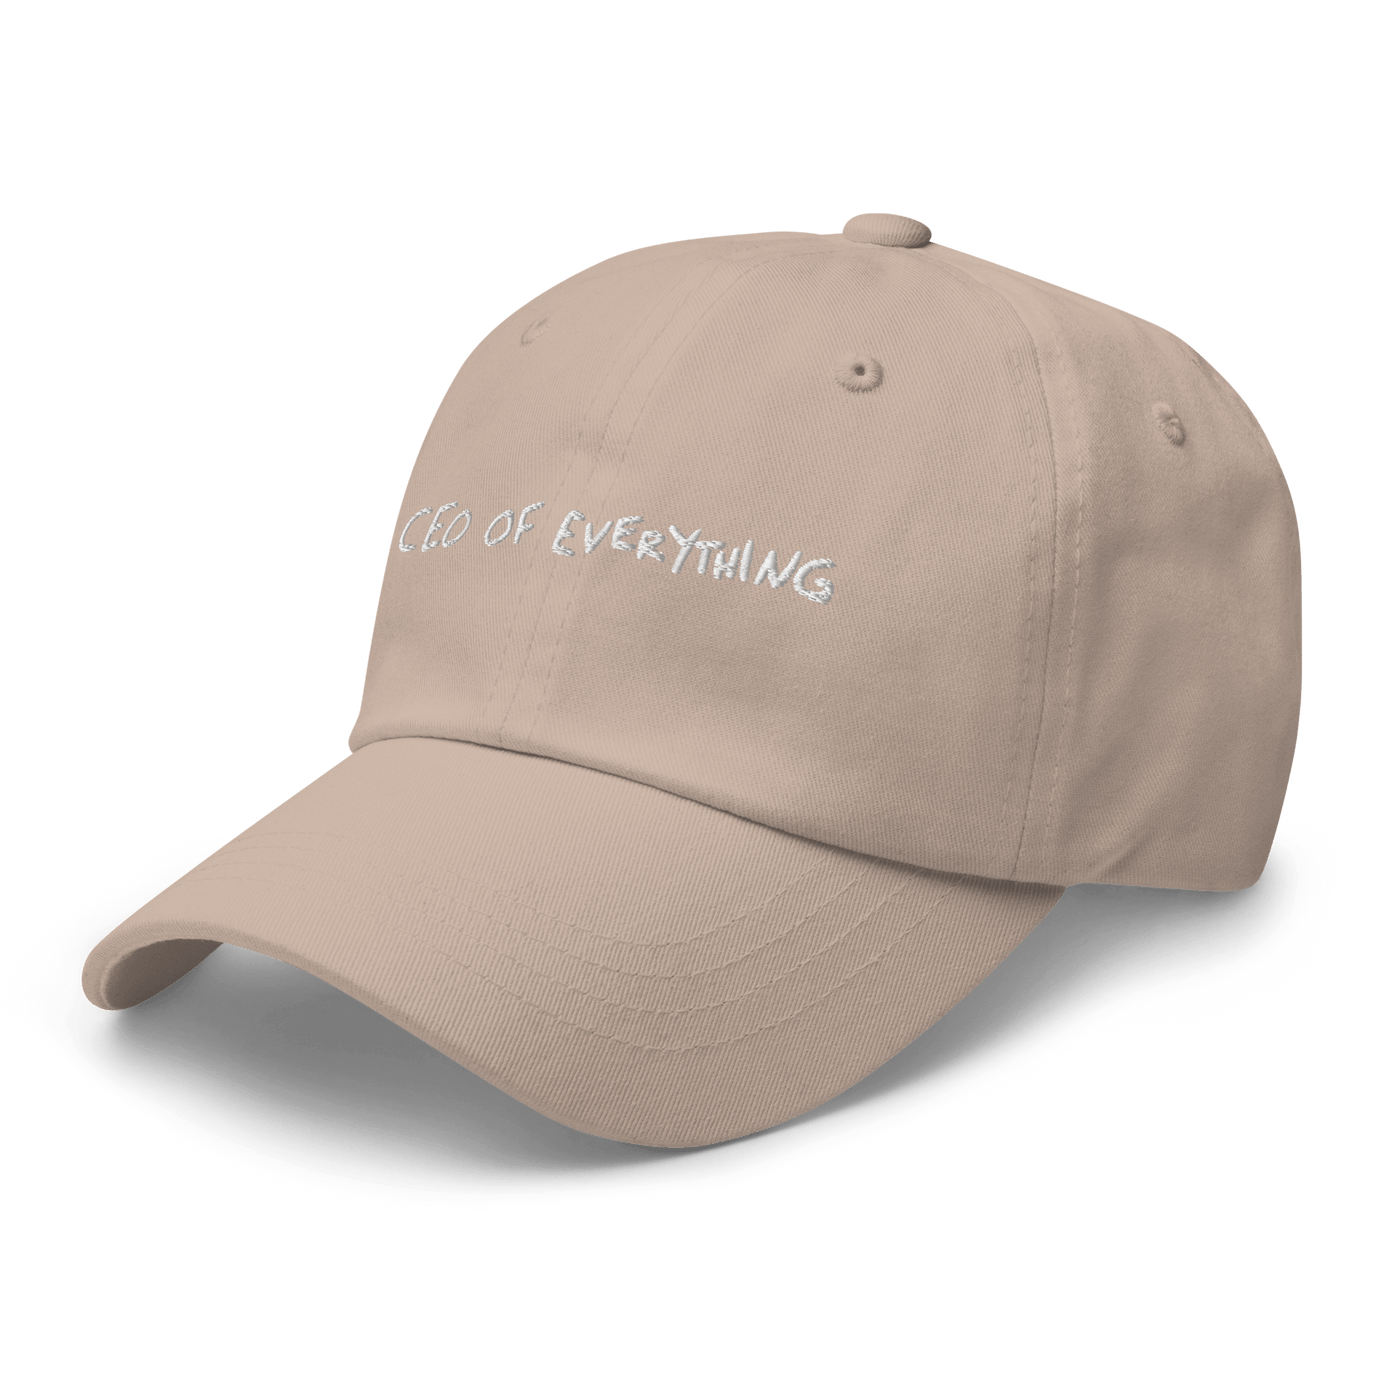 CEO of everything Dad hat - Stone - - Just Another Cap Store